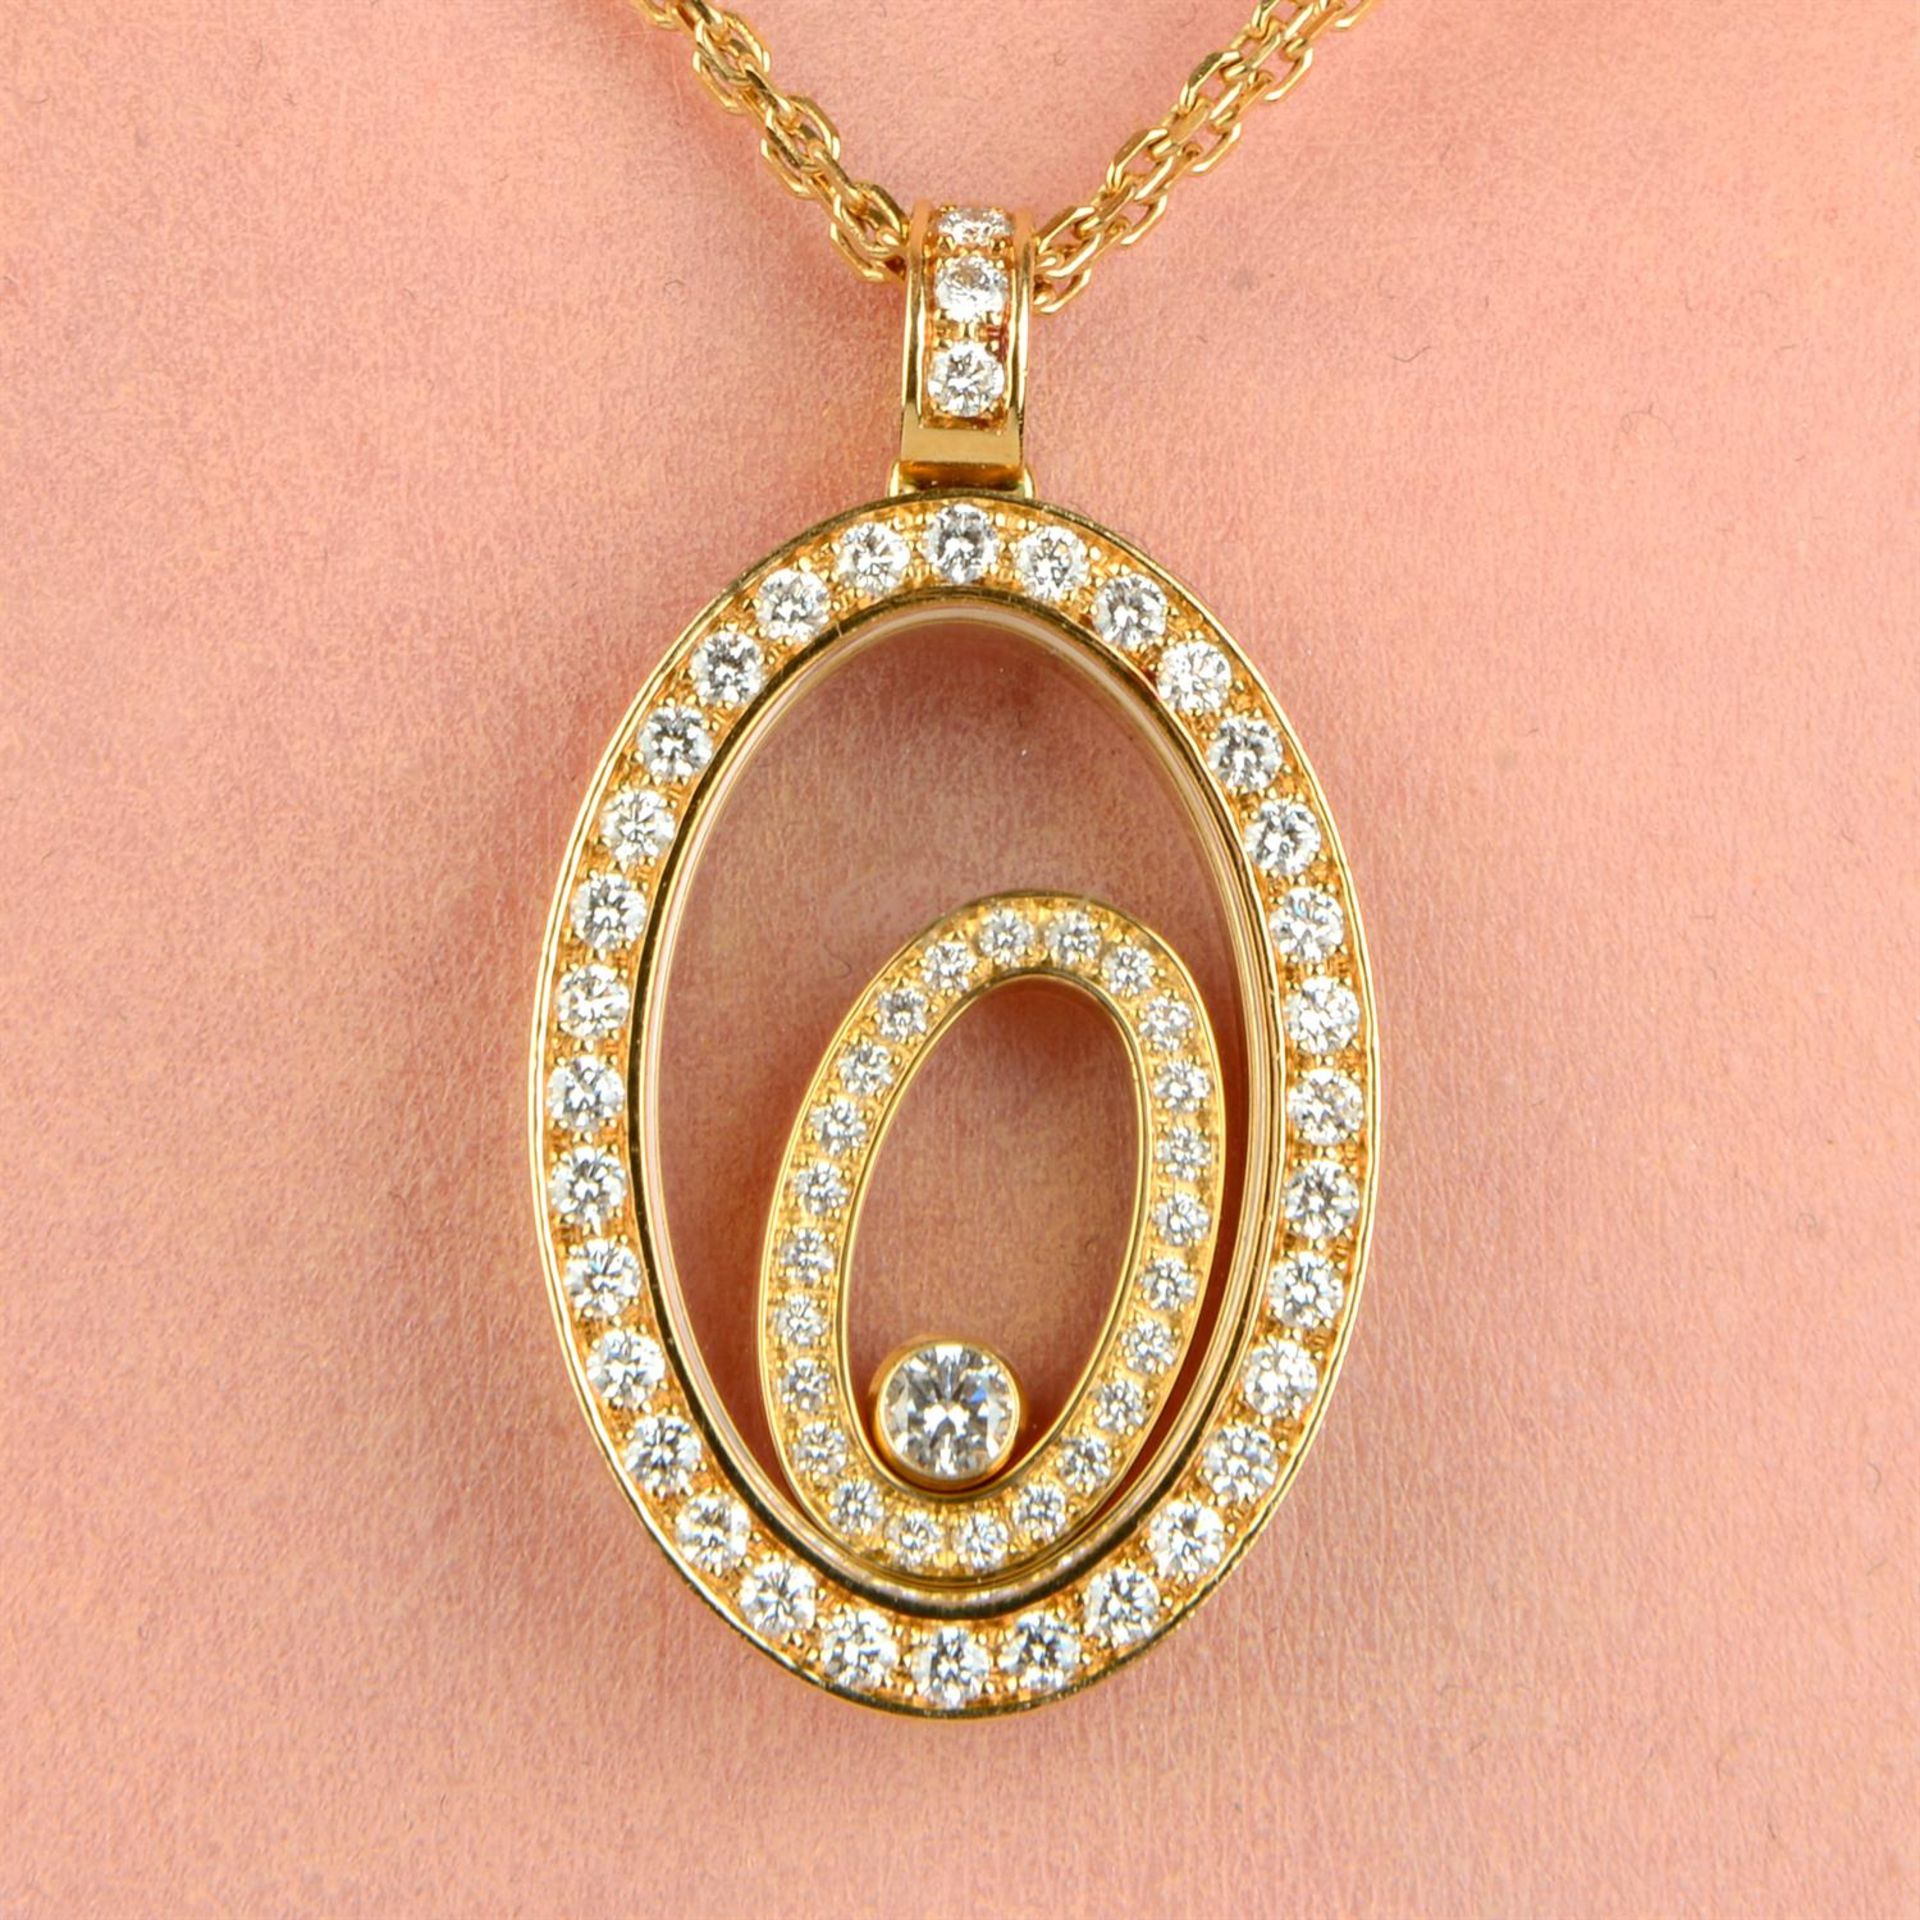 An 18ct gold brilliant-cut diamond 'Happy Spirit' pendant, with two-row chain, by Chopard.